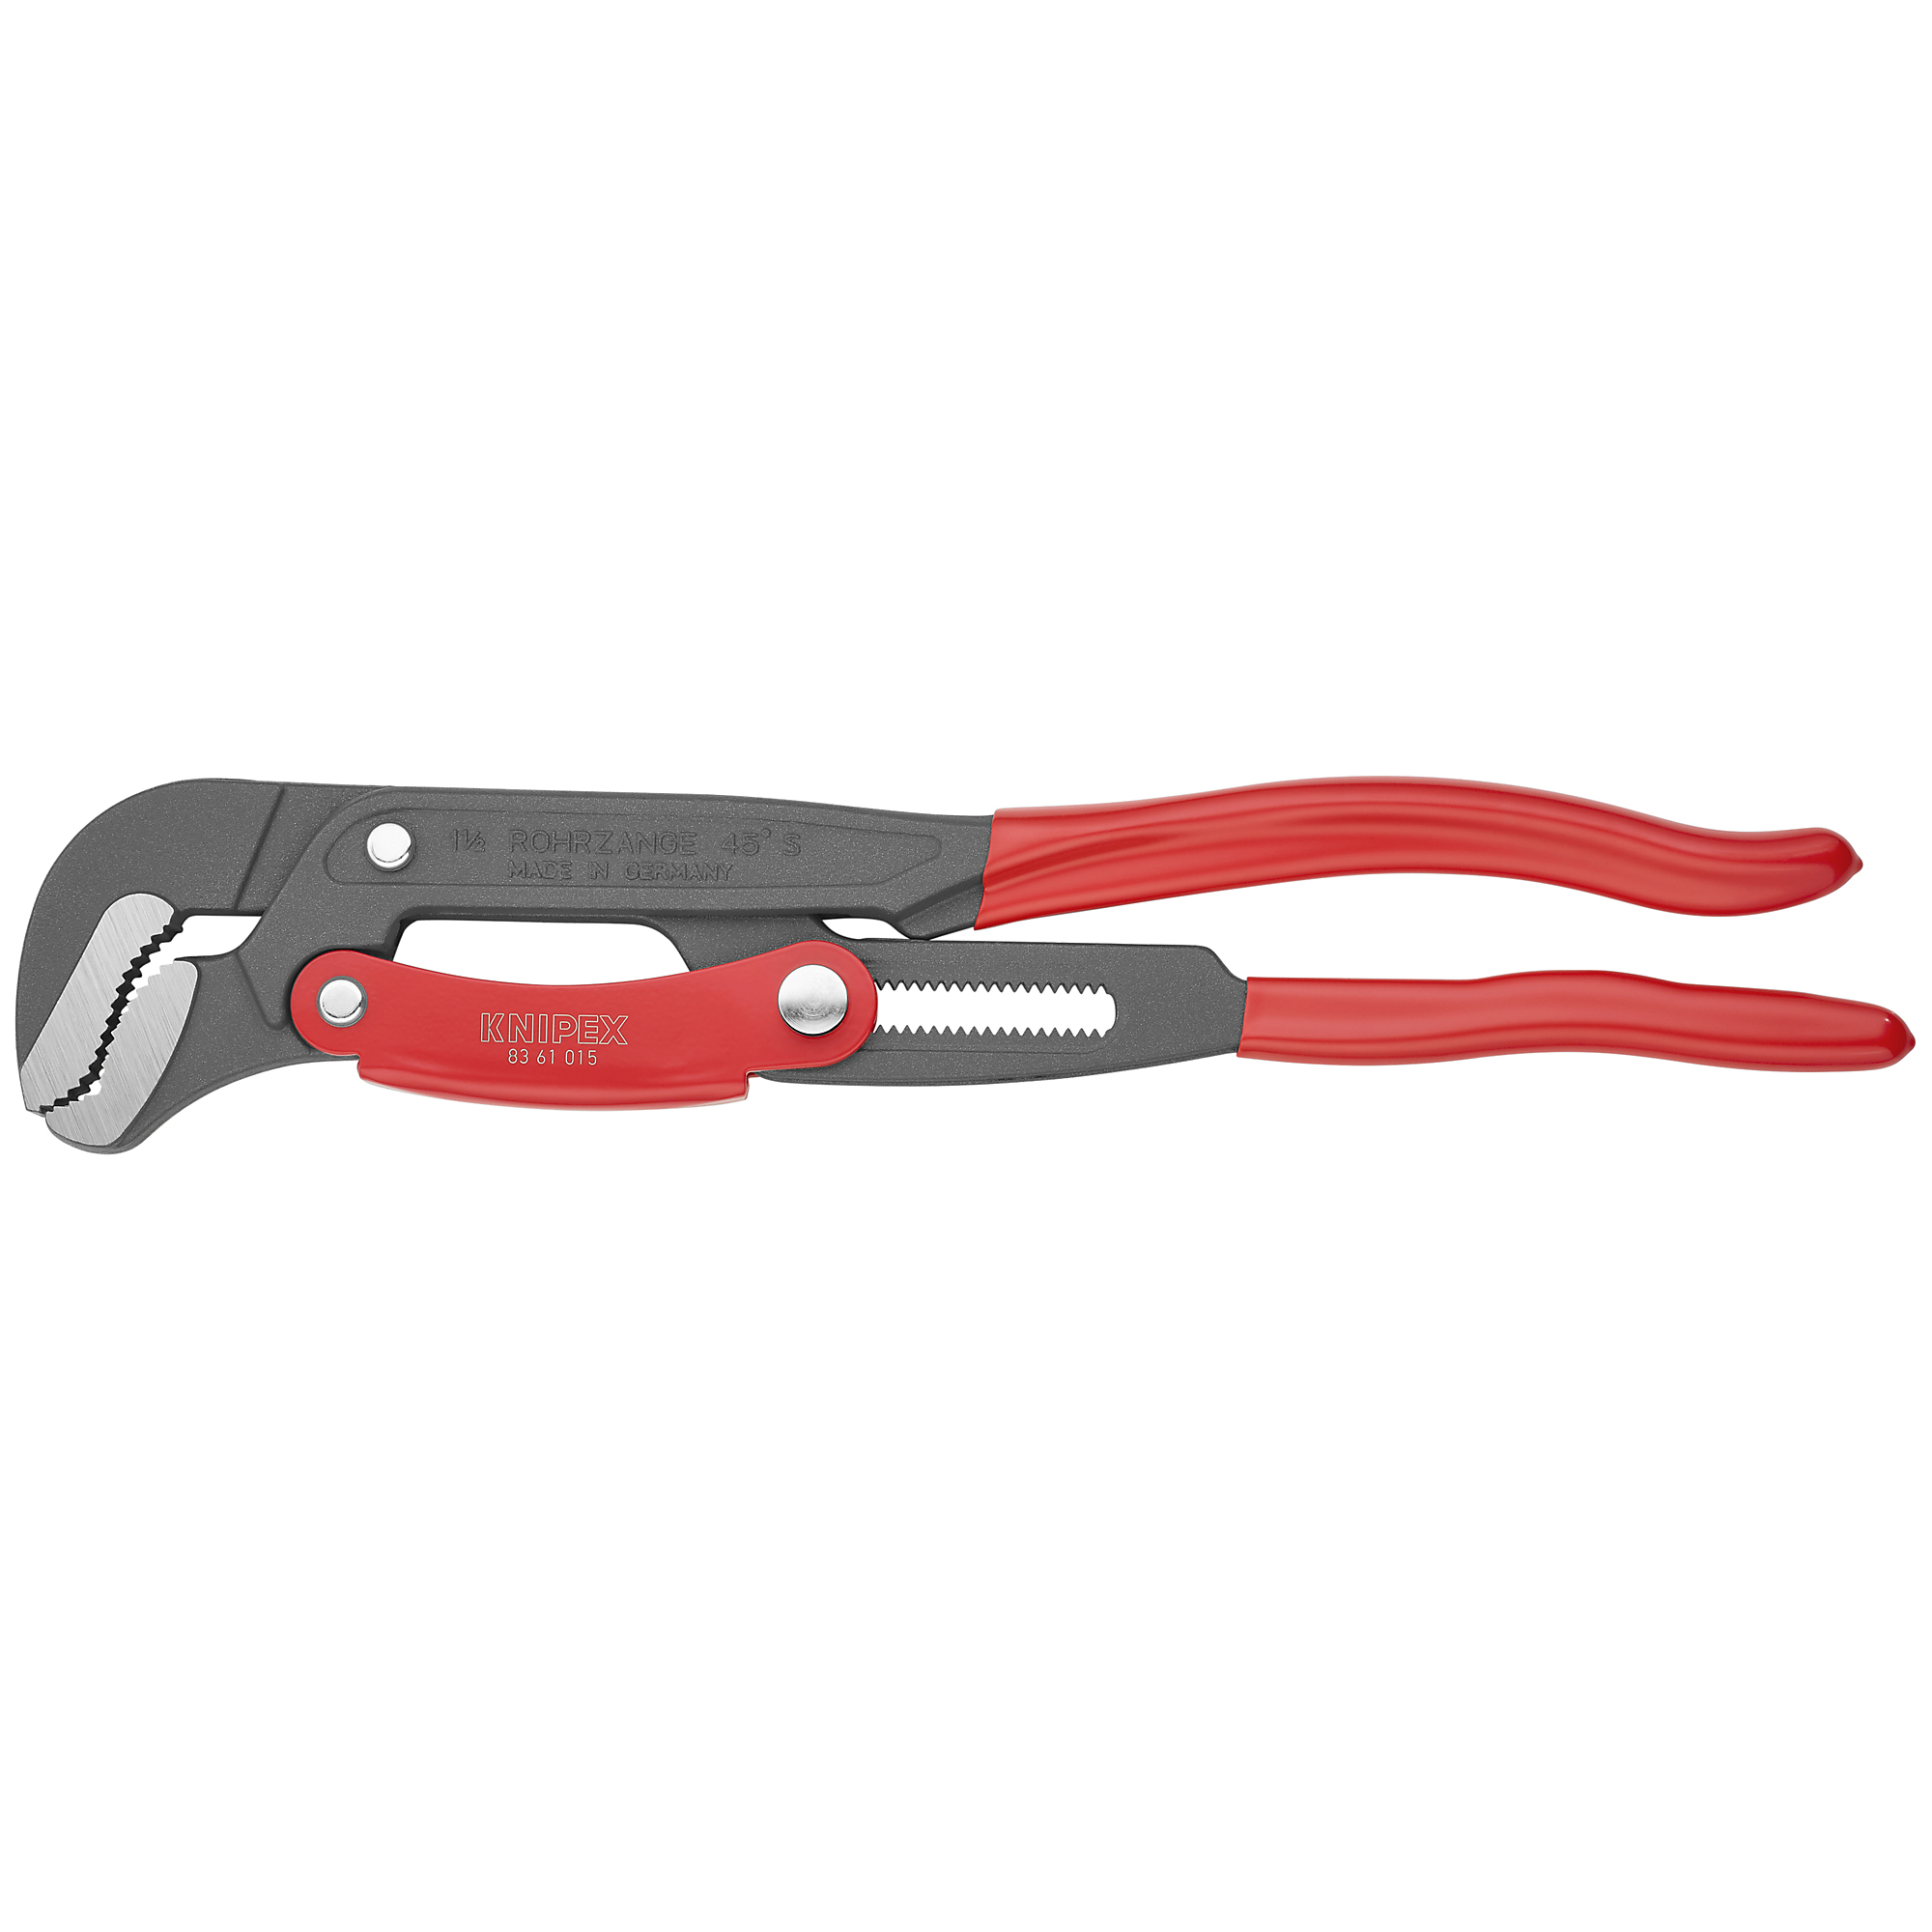 KNIPEX, Rapid Adjust Swedish Pipe Wrench-S-Type, 16.5Inch, Pieces (qty.) 1 Material Steel, Jaw Capacity 2.046875 in, Model 83 61 015